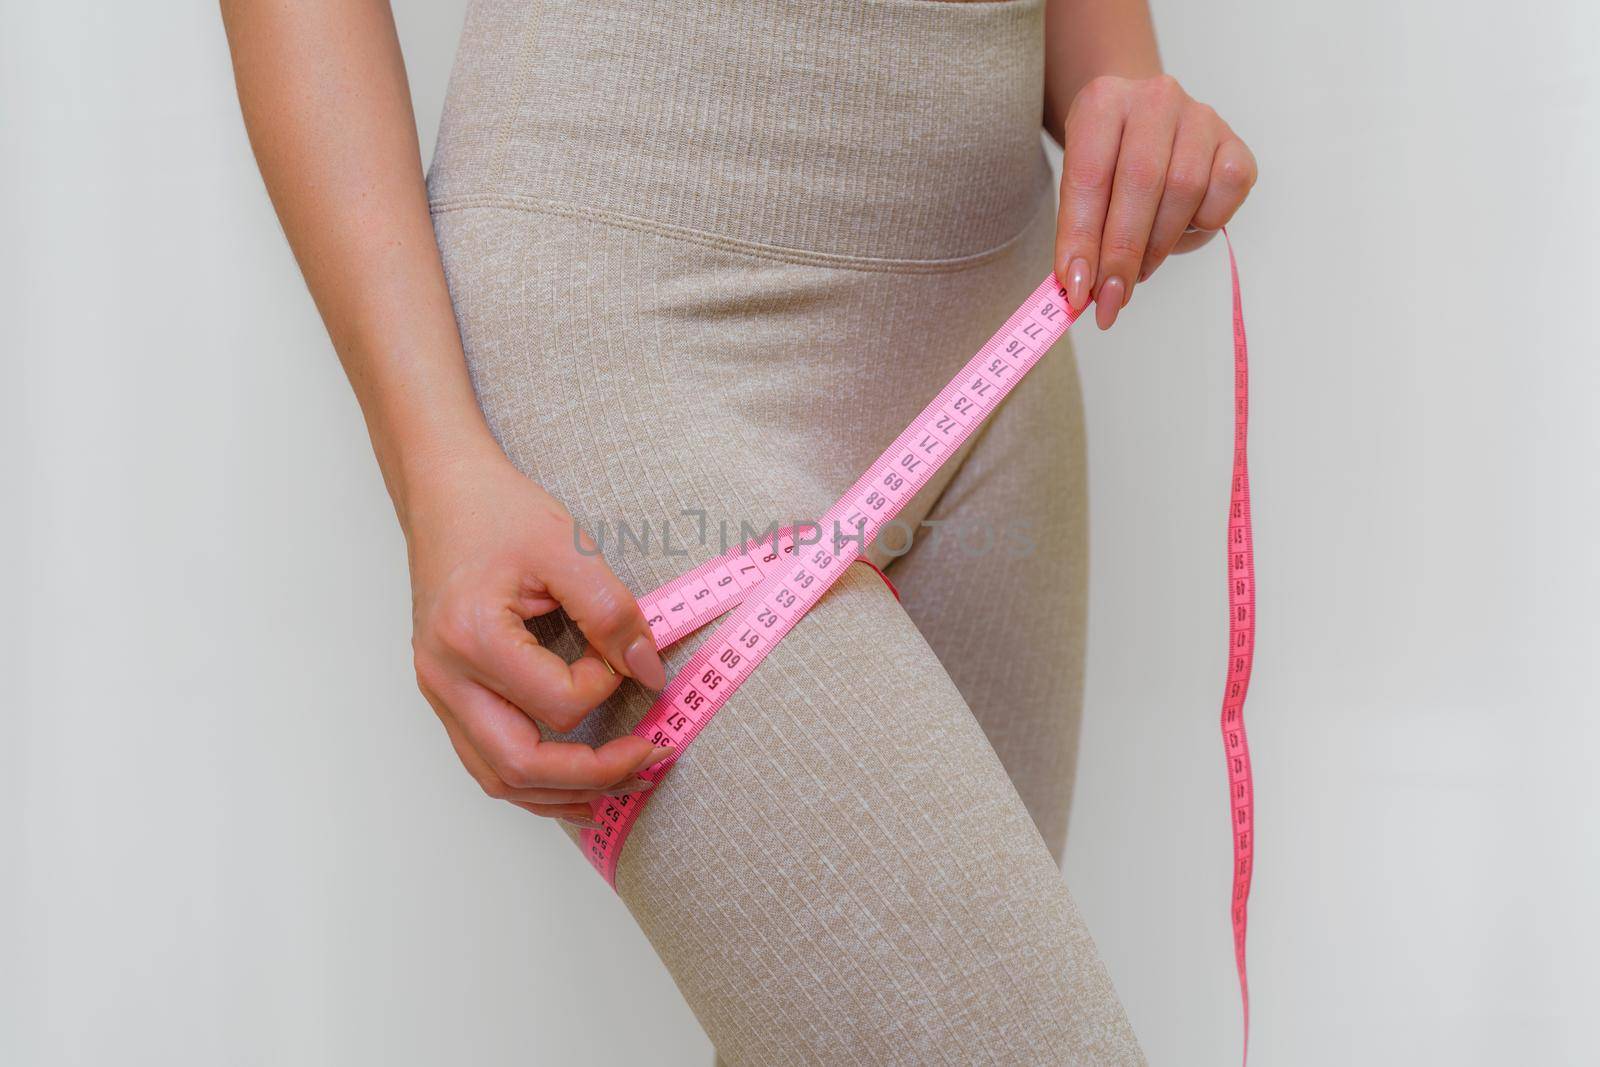 Cropped view of slim woman measuring her leg with tape measure at home, close-up. An unrecognizable European woman checks the result of a weight loss diet or liposuction indoors. Healthy lifestyle